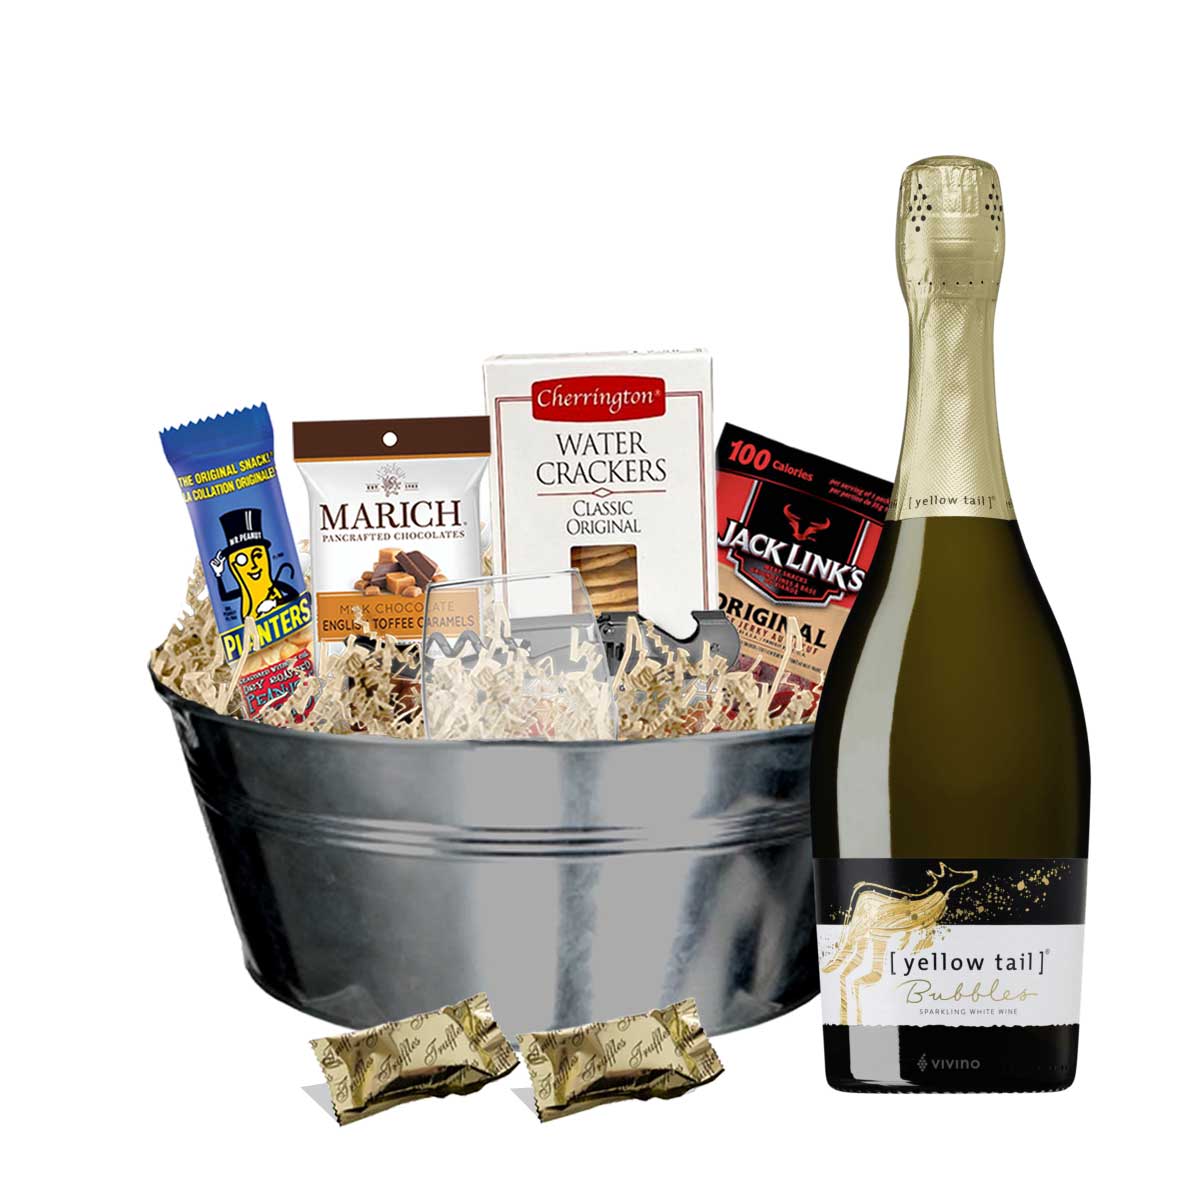 TAG Liquor Stores BC - Yellow Tail Bubbles 750ml Gift Basket